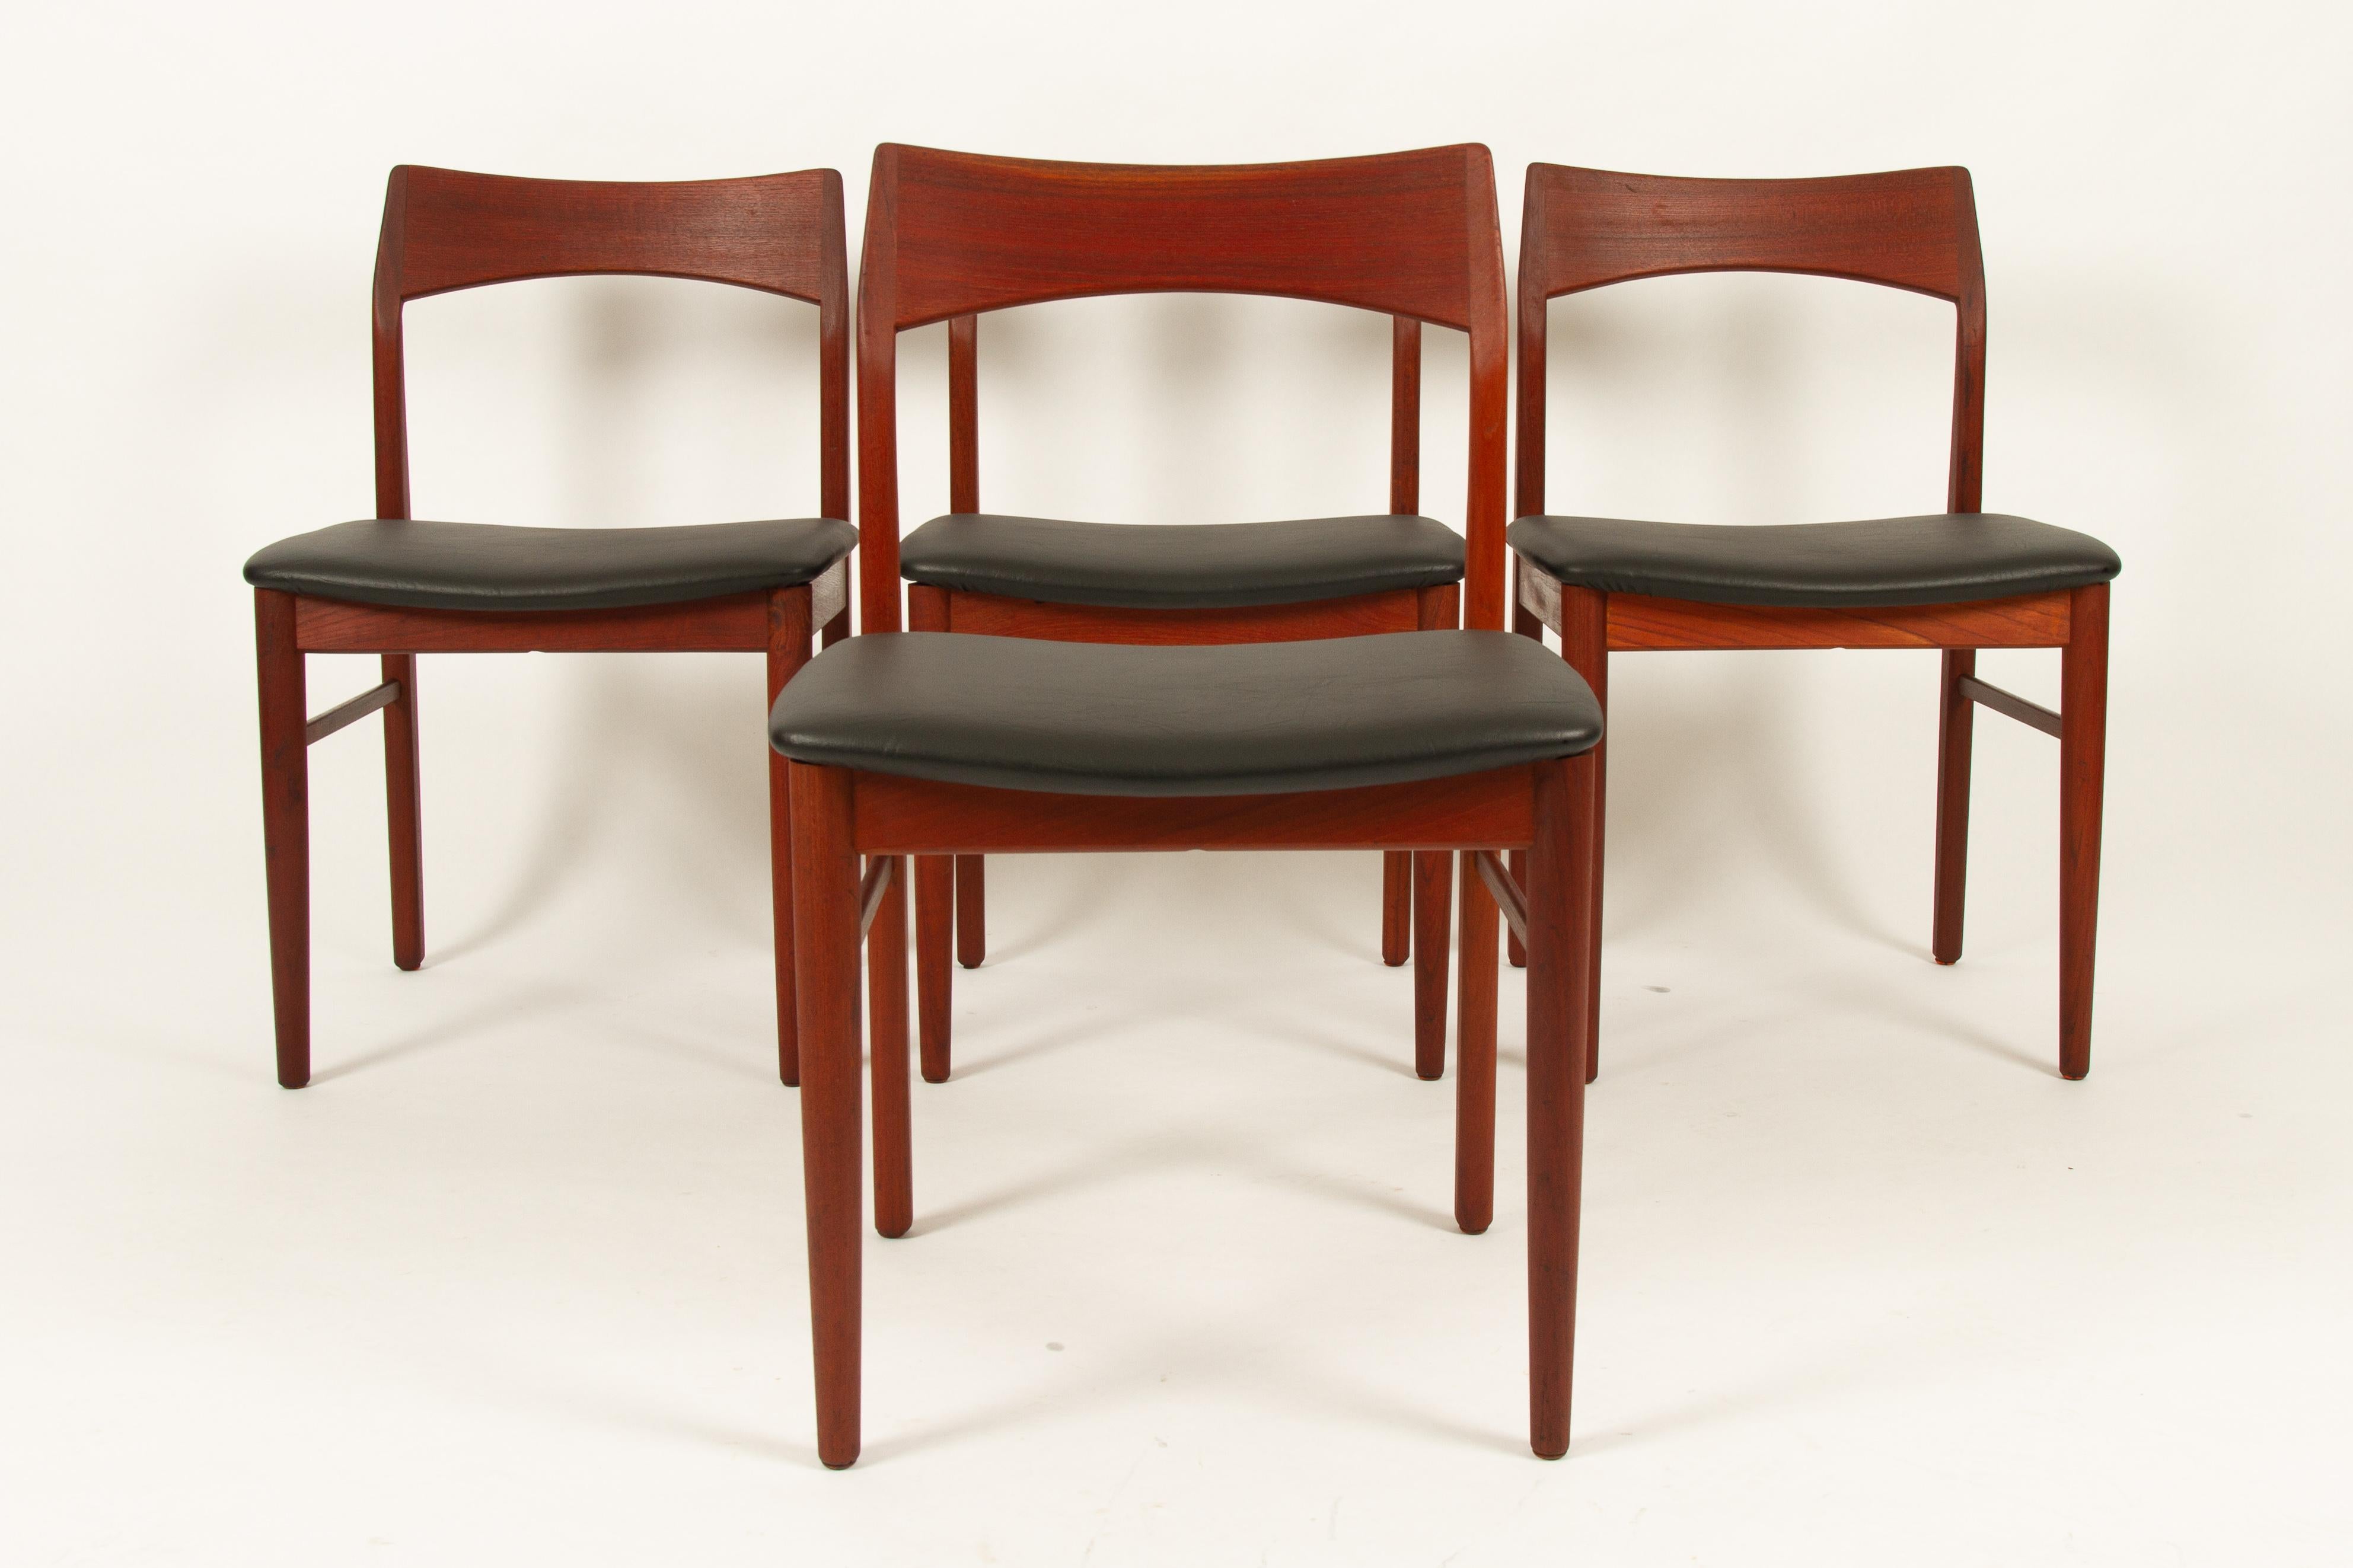 Set of four Danish Mid-Century Modern dining chairs designed by Danish architect Henning Kjærnulf and made by Vejle Stole- og Møbelfabrik in 1960s.
Solid teak frame with tapered legs. Curved backrests in solid teak that angles backwards for better